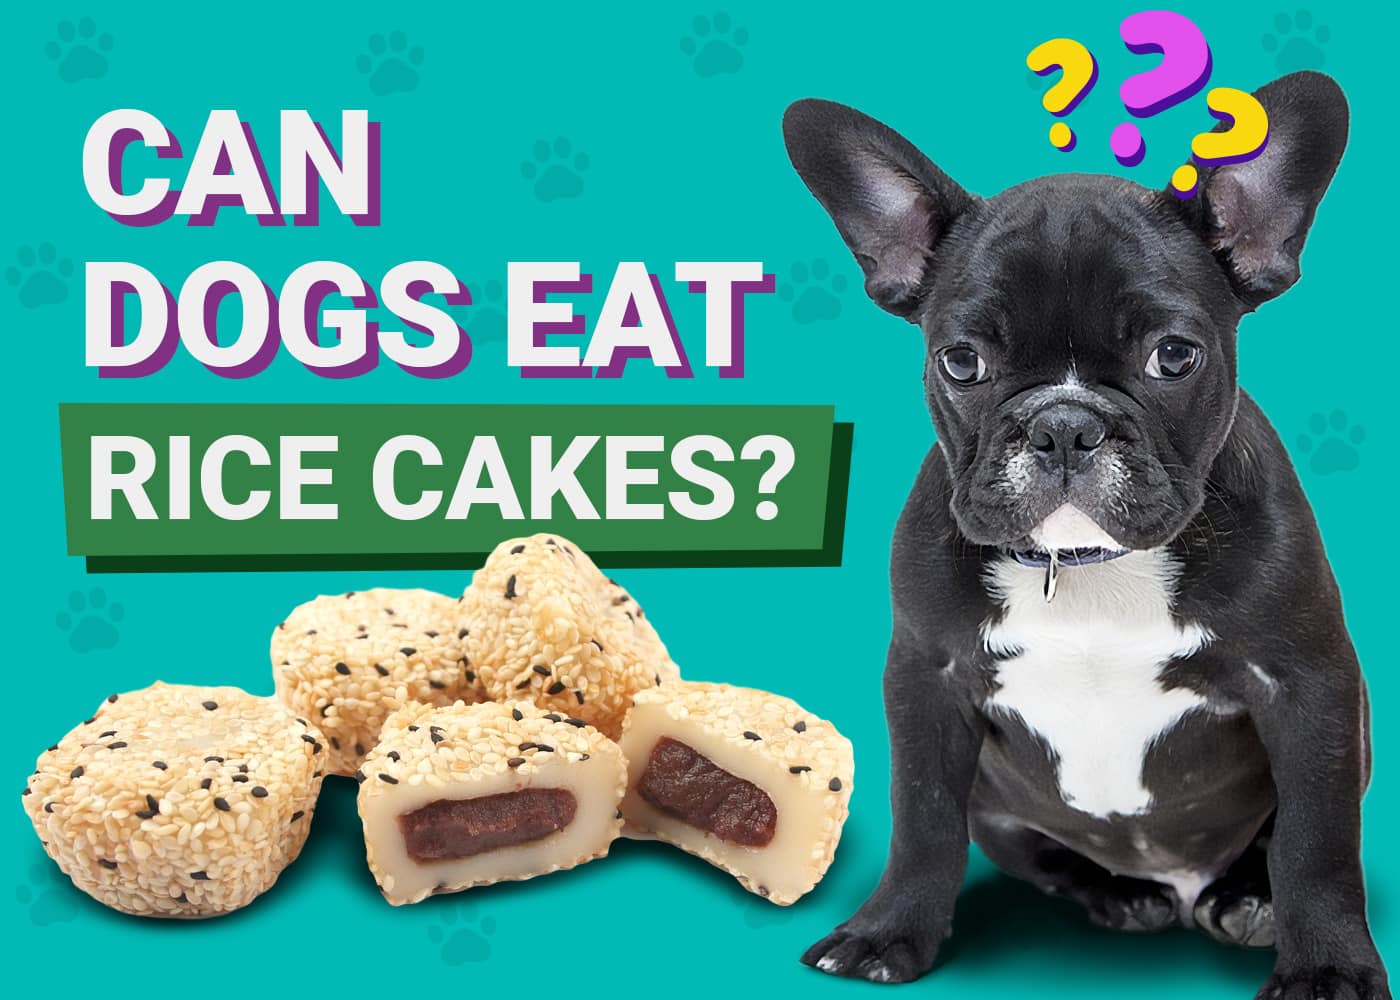 Can Dogs Eat Rice Cakes